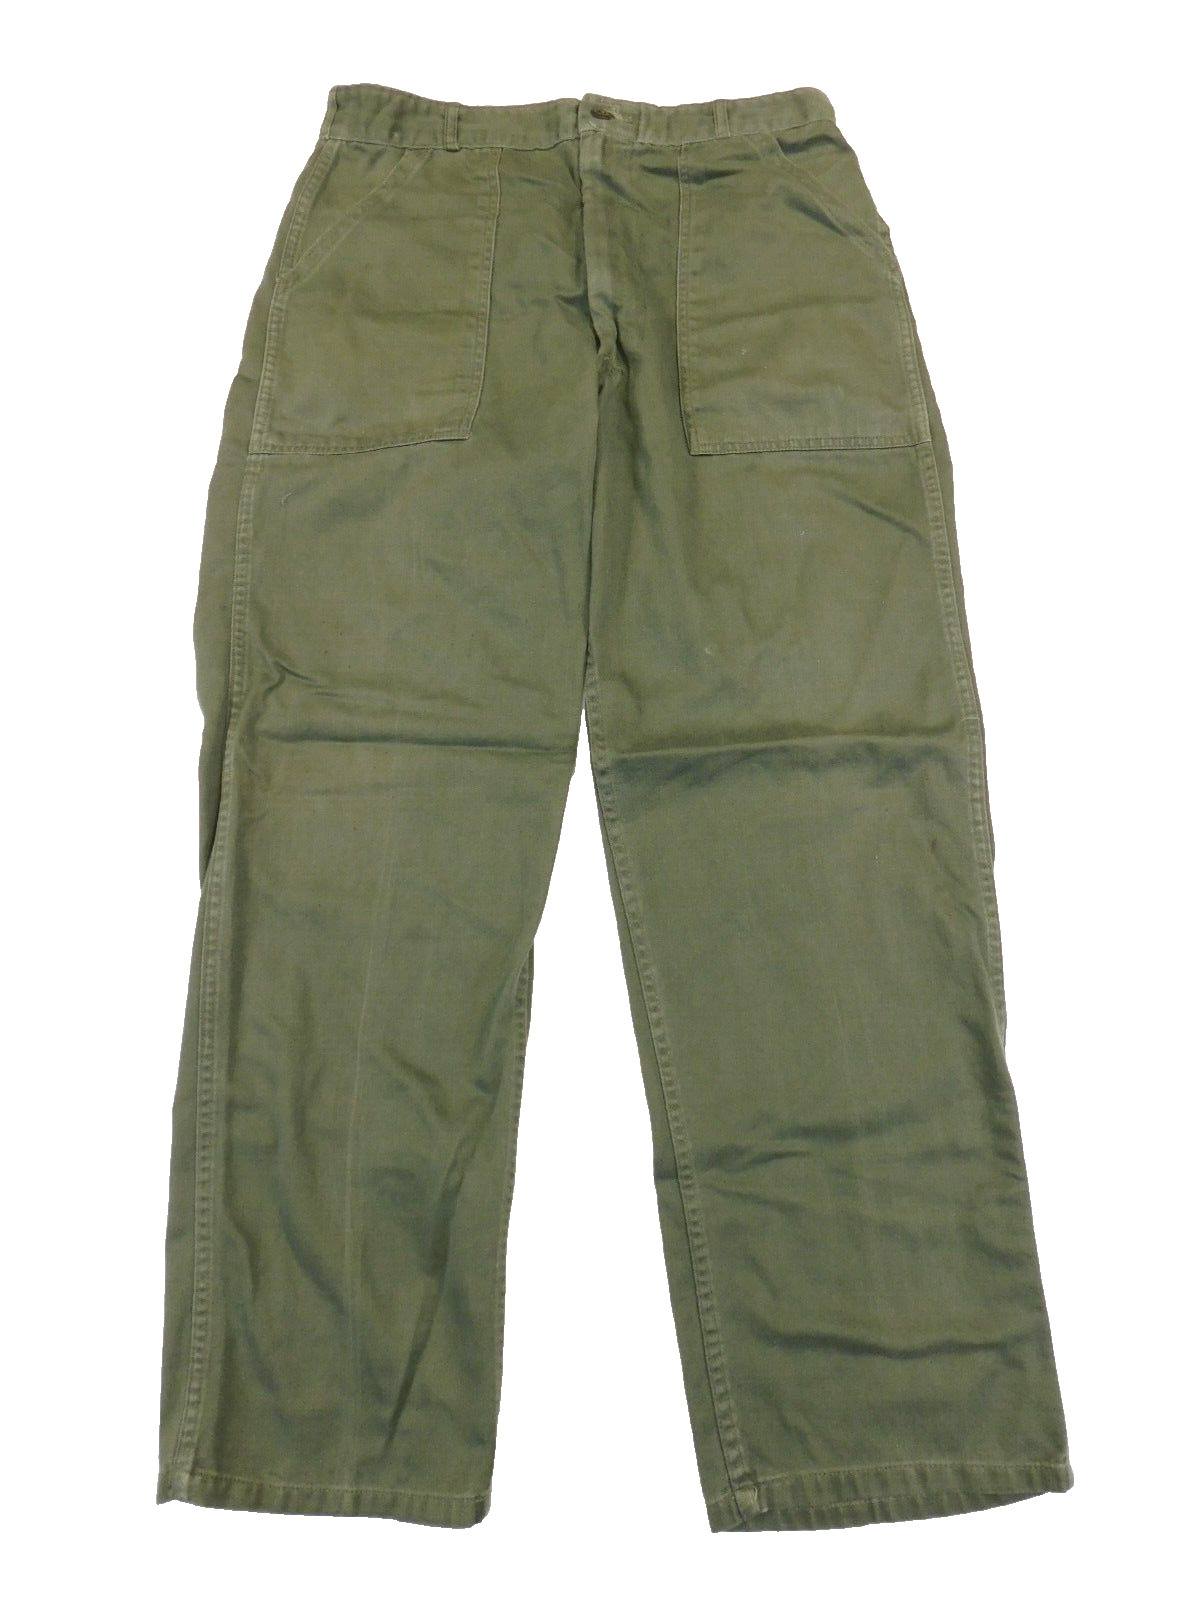 Vietnam US Army Fatigue Pants 34 x 29 OG-107 Sateen Cttn Green Military Trousers